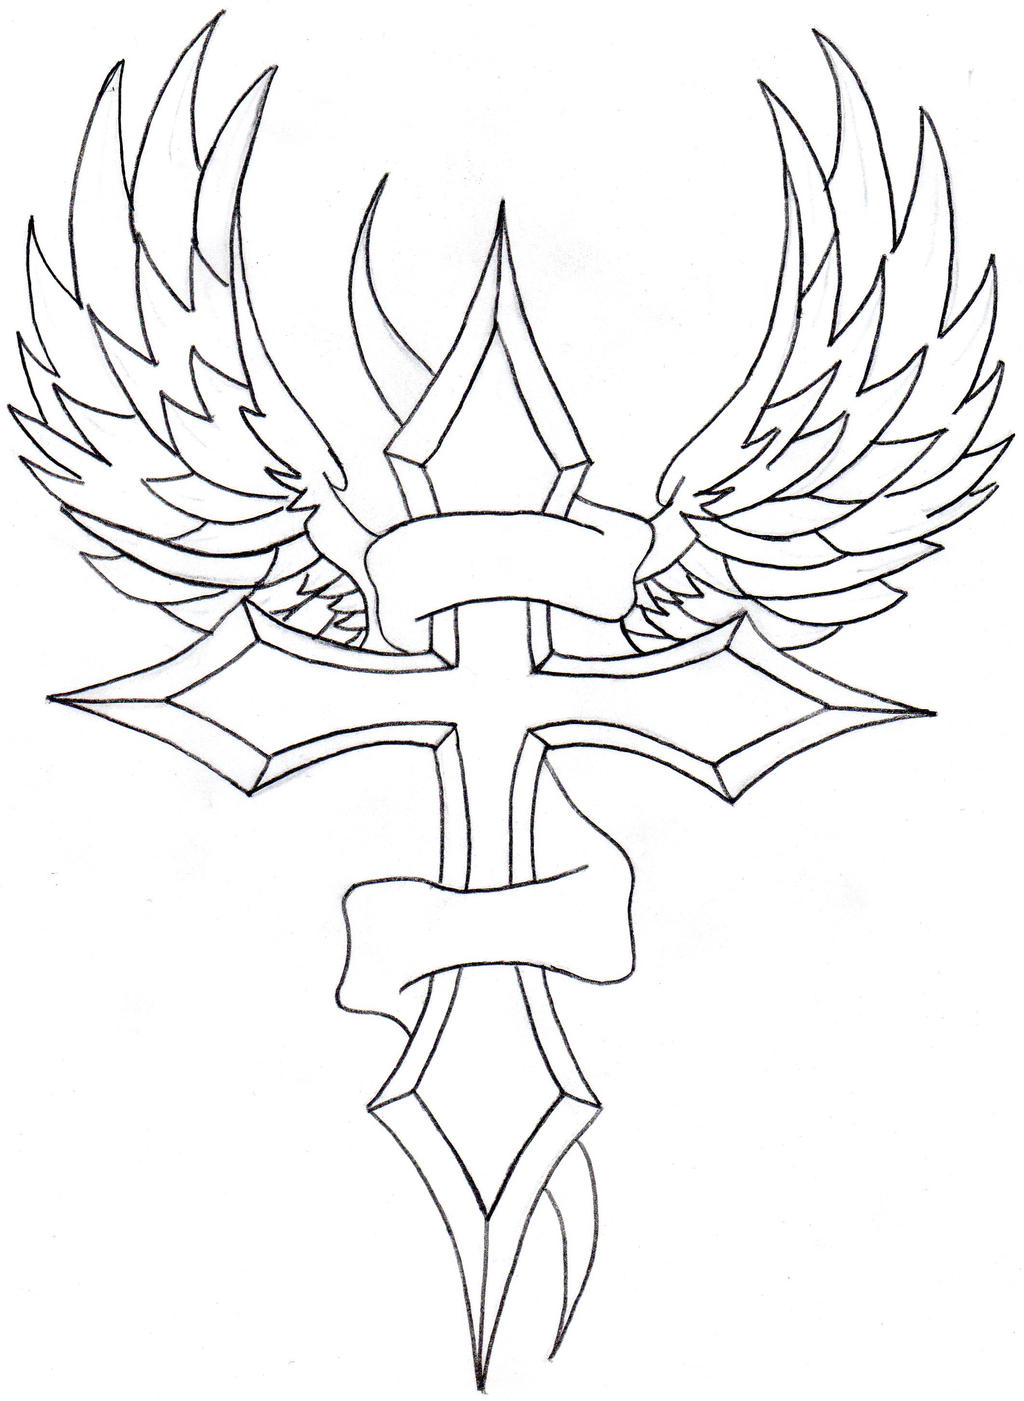 Winged Cross and Banner by dannyj321 on DeviantArt